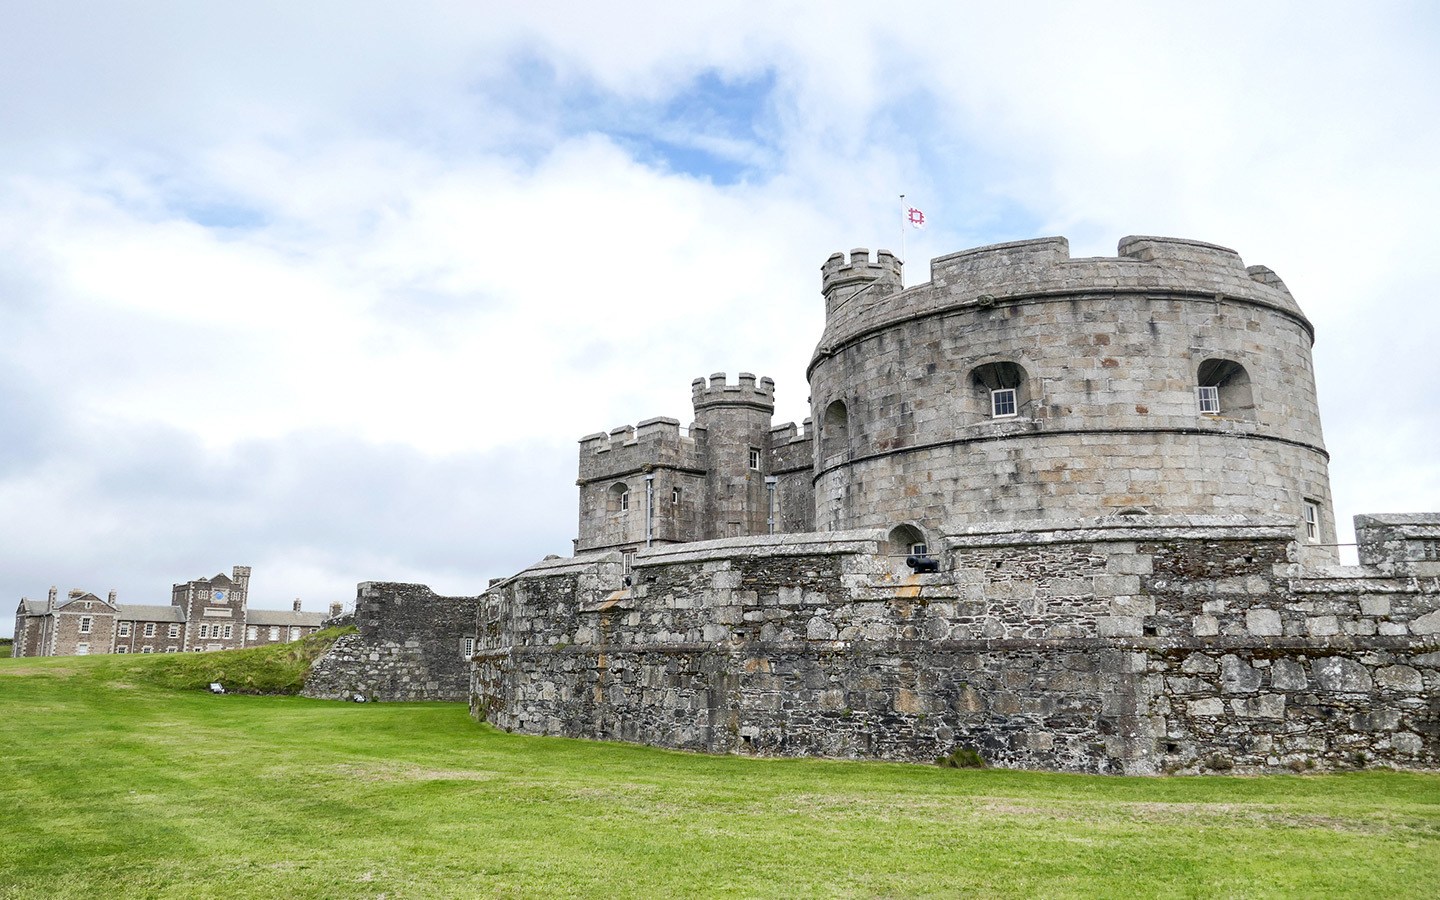 The ruins of Pendennis Castle in Falmouth, Cornwall